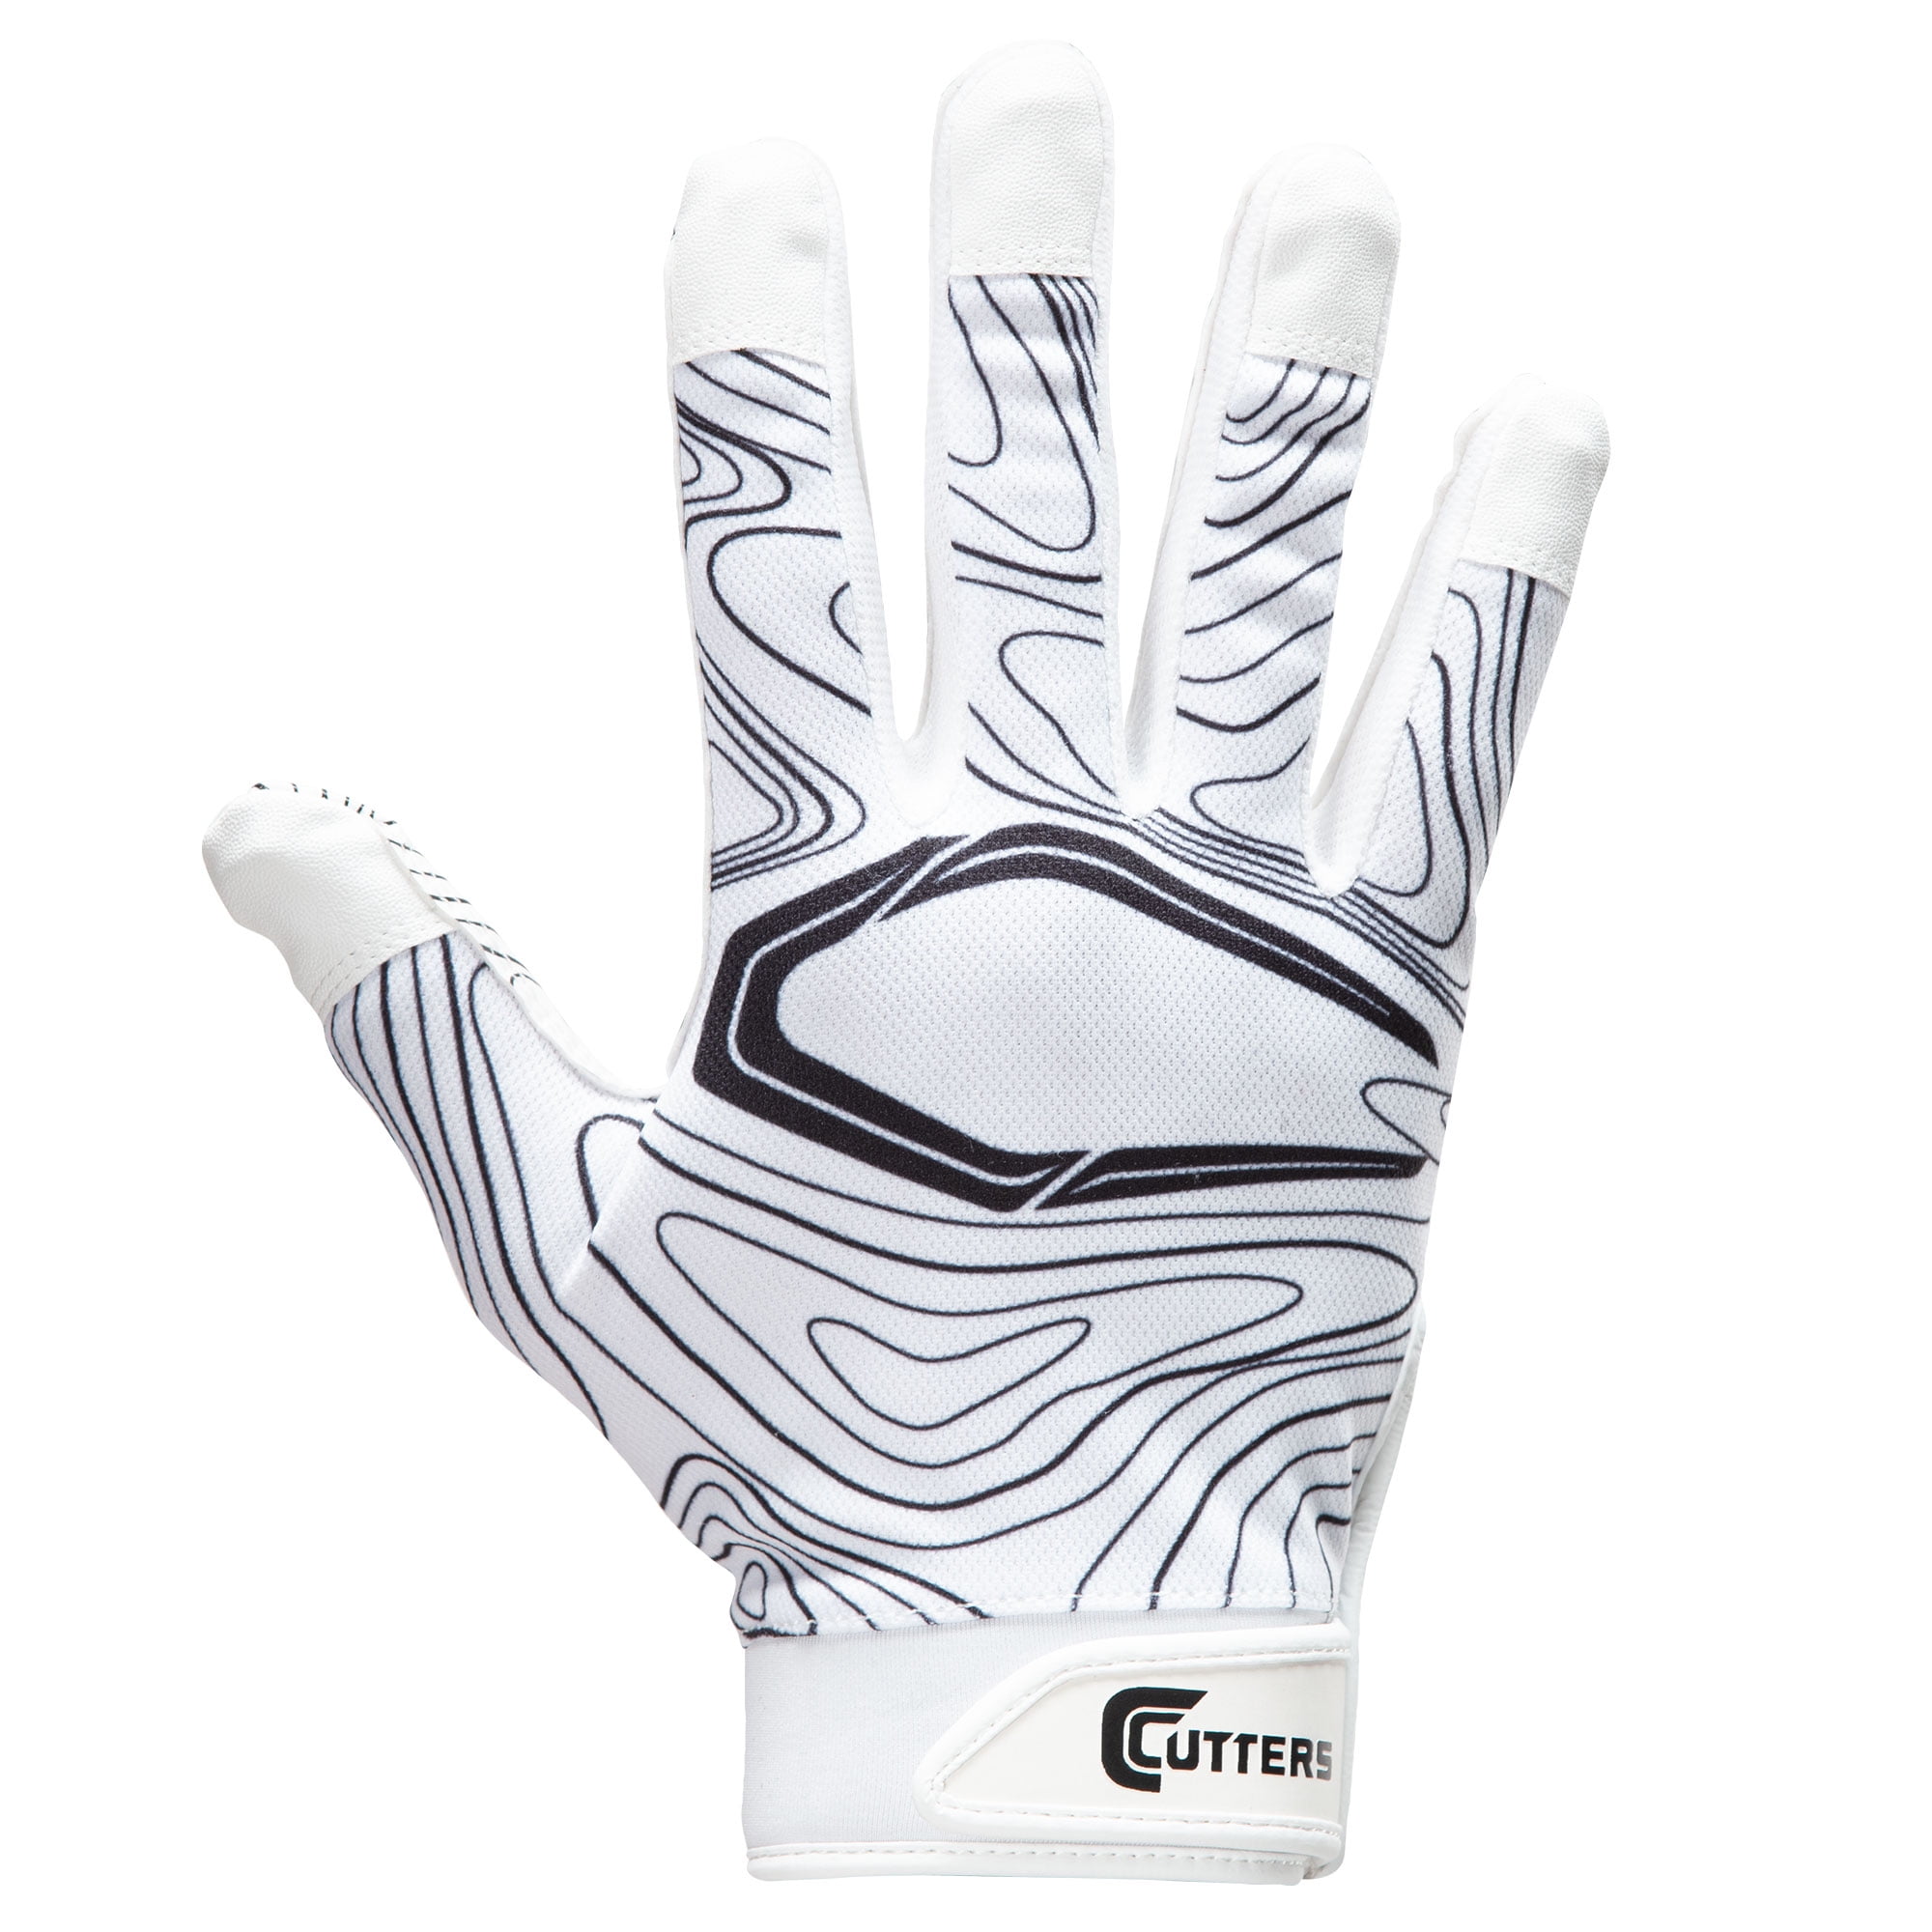 Cutters Gamer Padded Football Glove for Lineman and All-Purpose Player Youth & Adult Sizes Grip Football Glove 